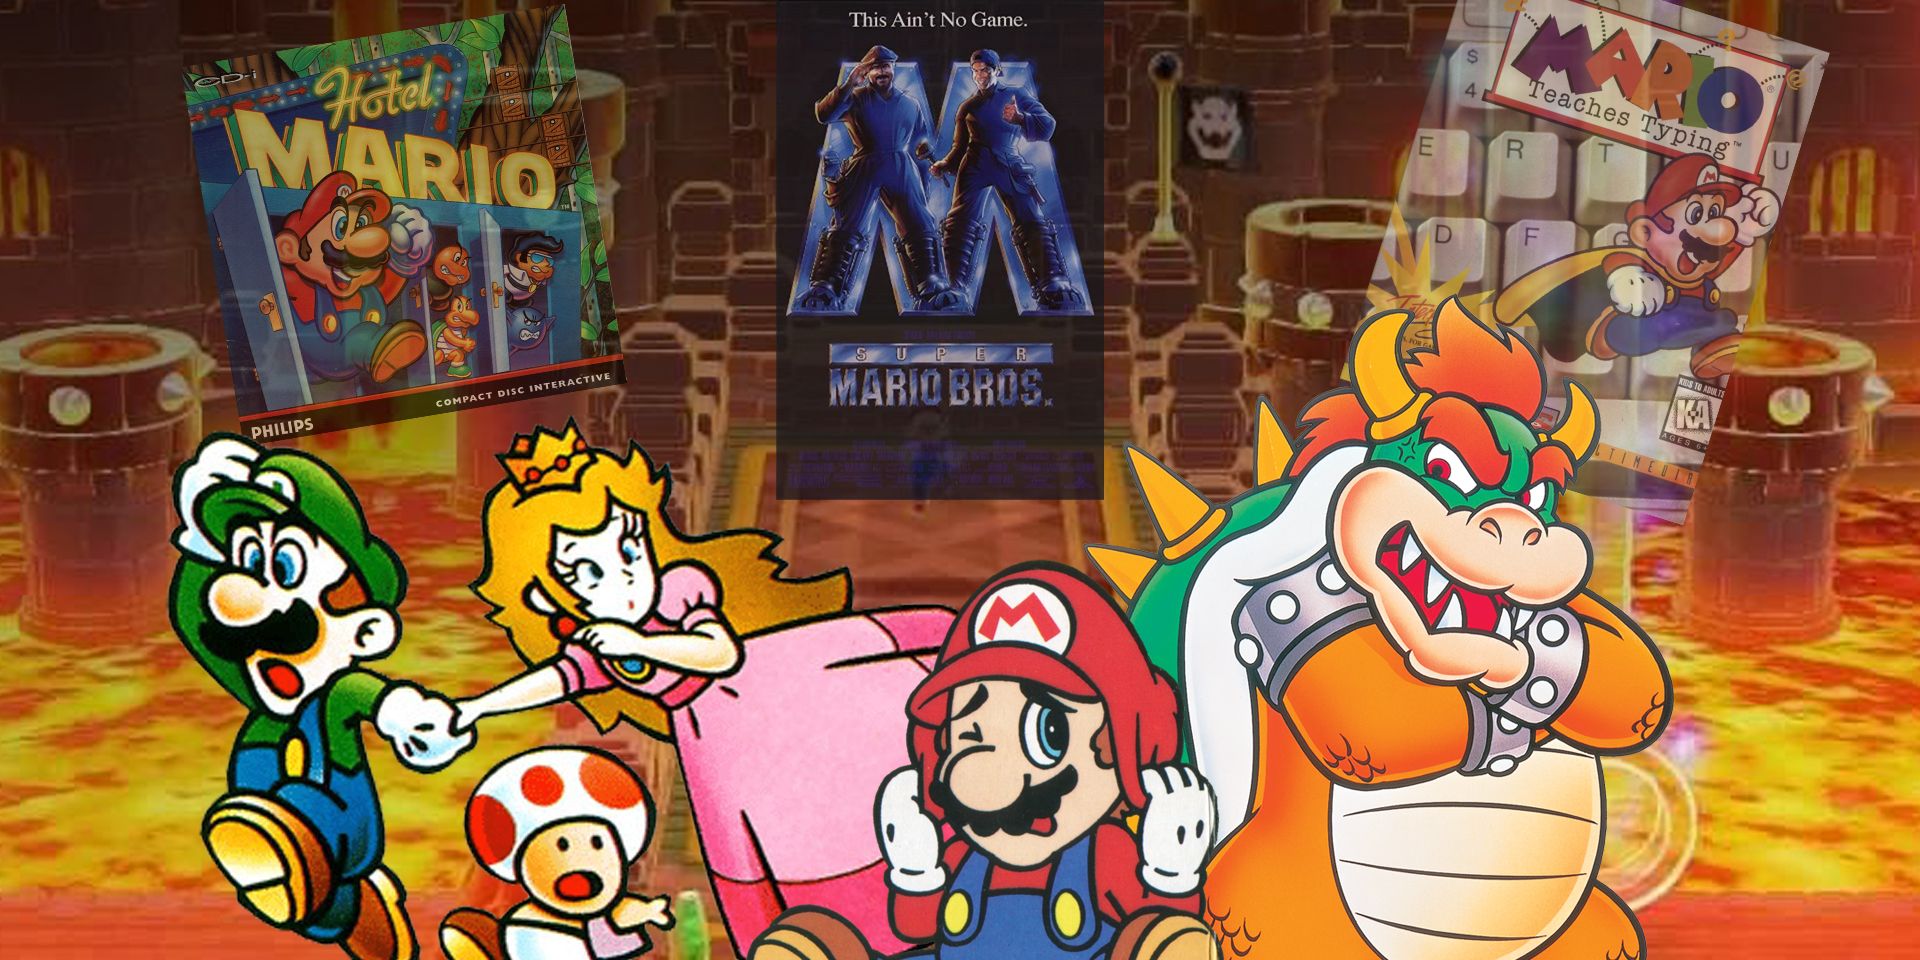 Mario and friends look away despondently from the franchises' biggest blunders.